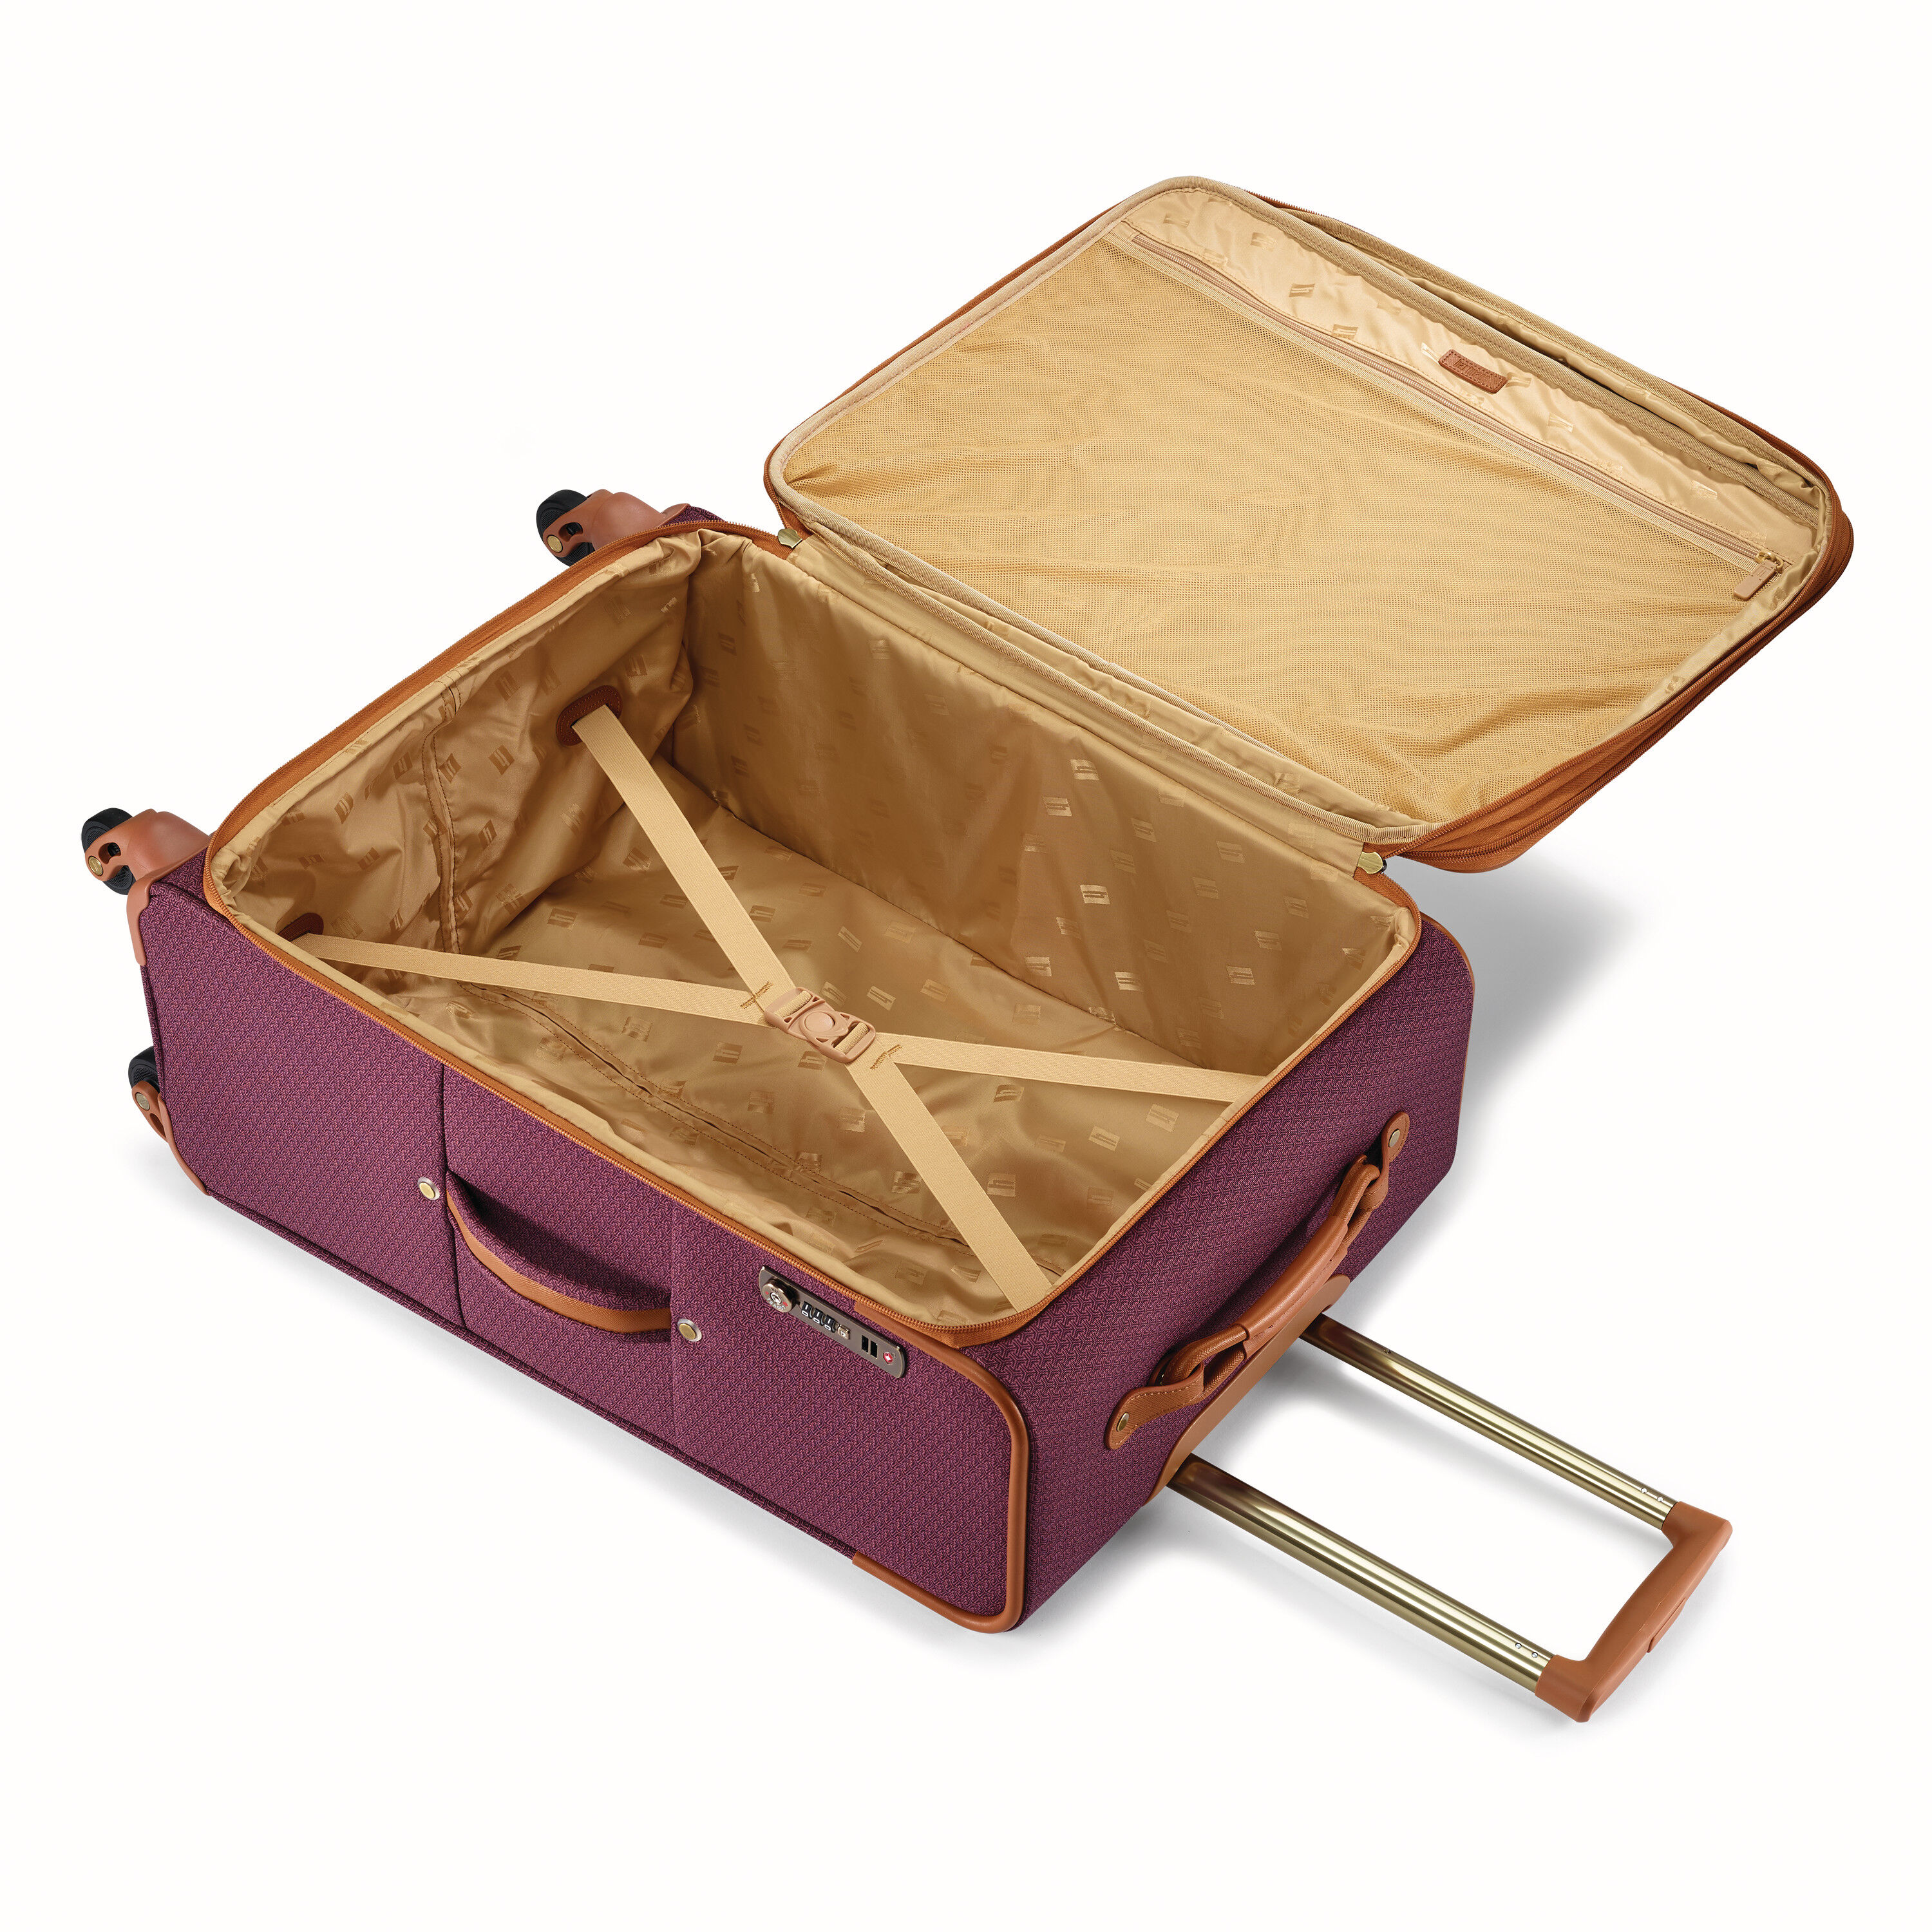 Luggage | Exquisite Styles for Discerning Travelers | Hartmann